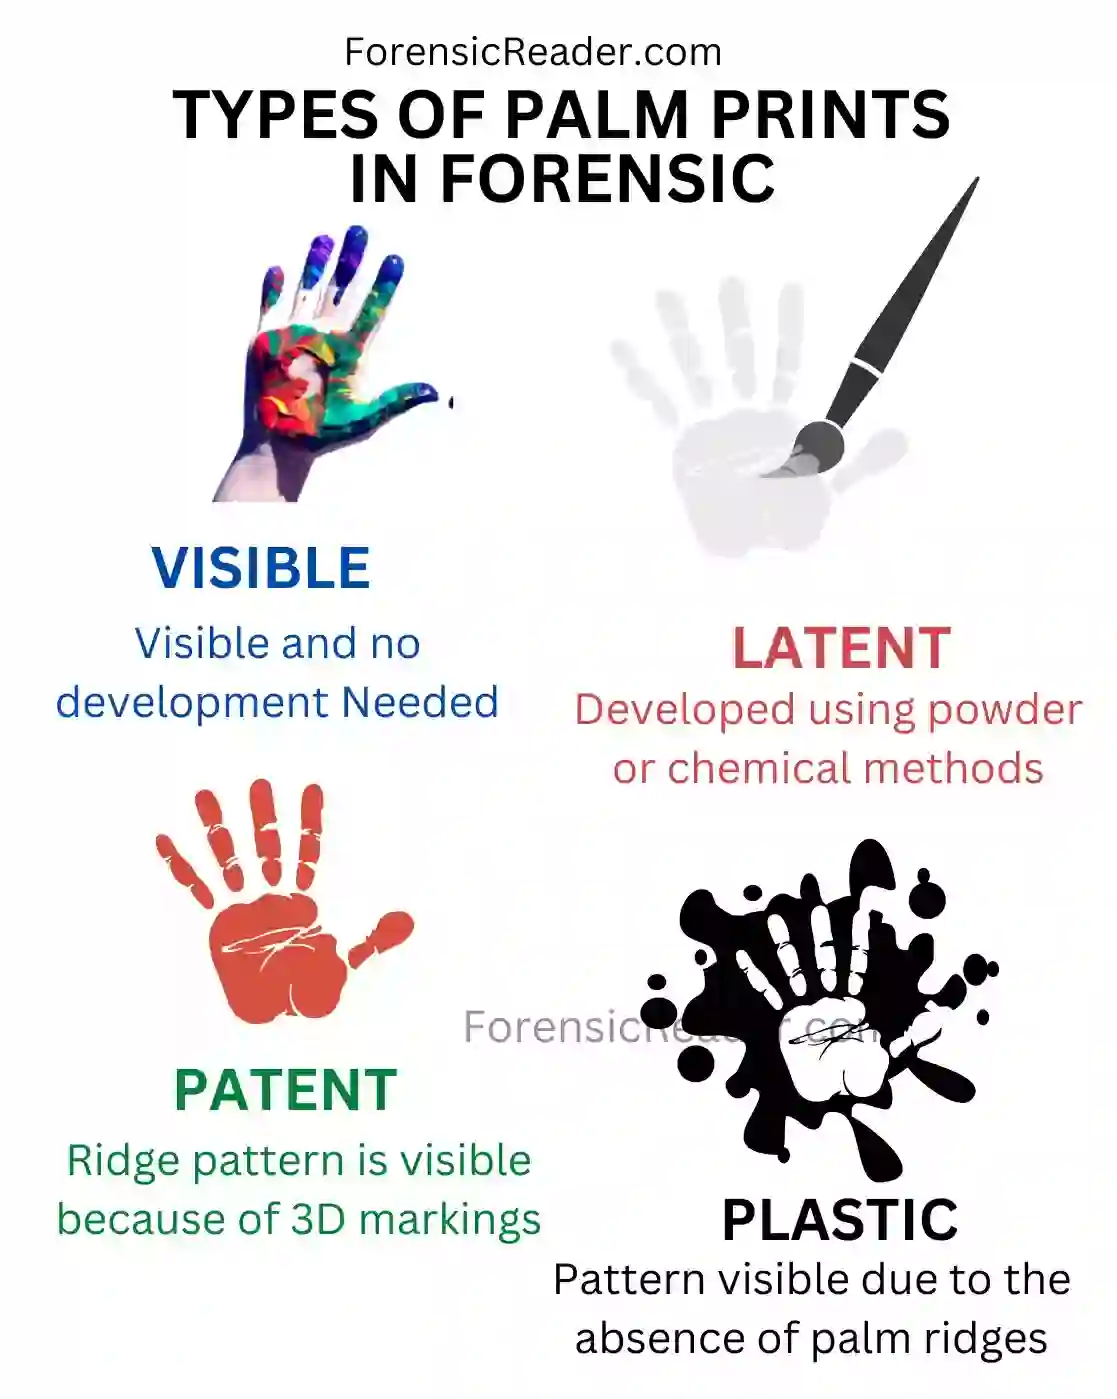 Types of Palm Prints in Forensic